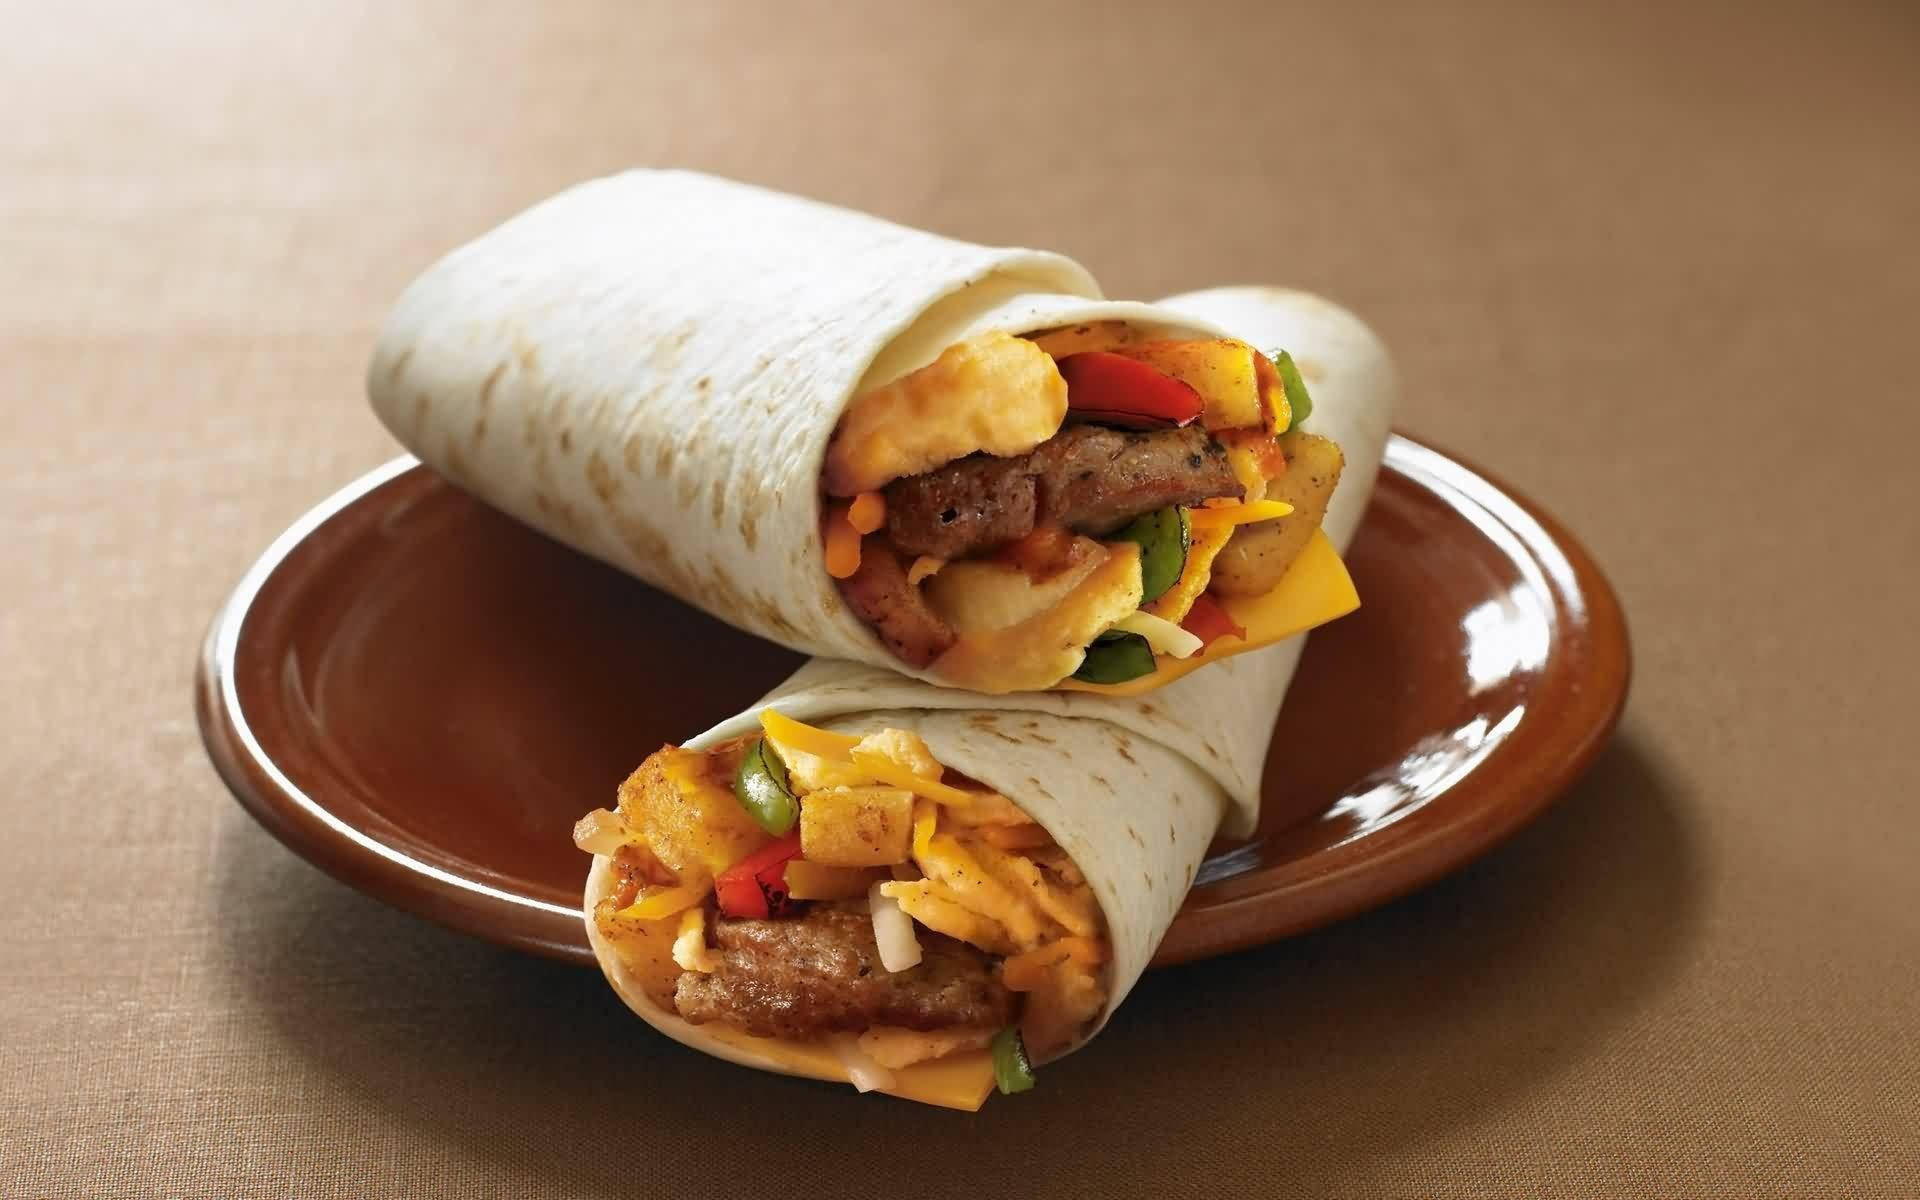 Download free Rolled Grilled Meat Burrito Wallpaper - MrWallpaper.com